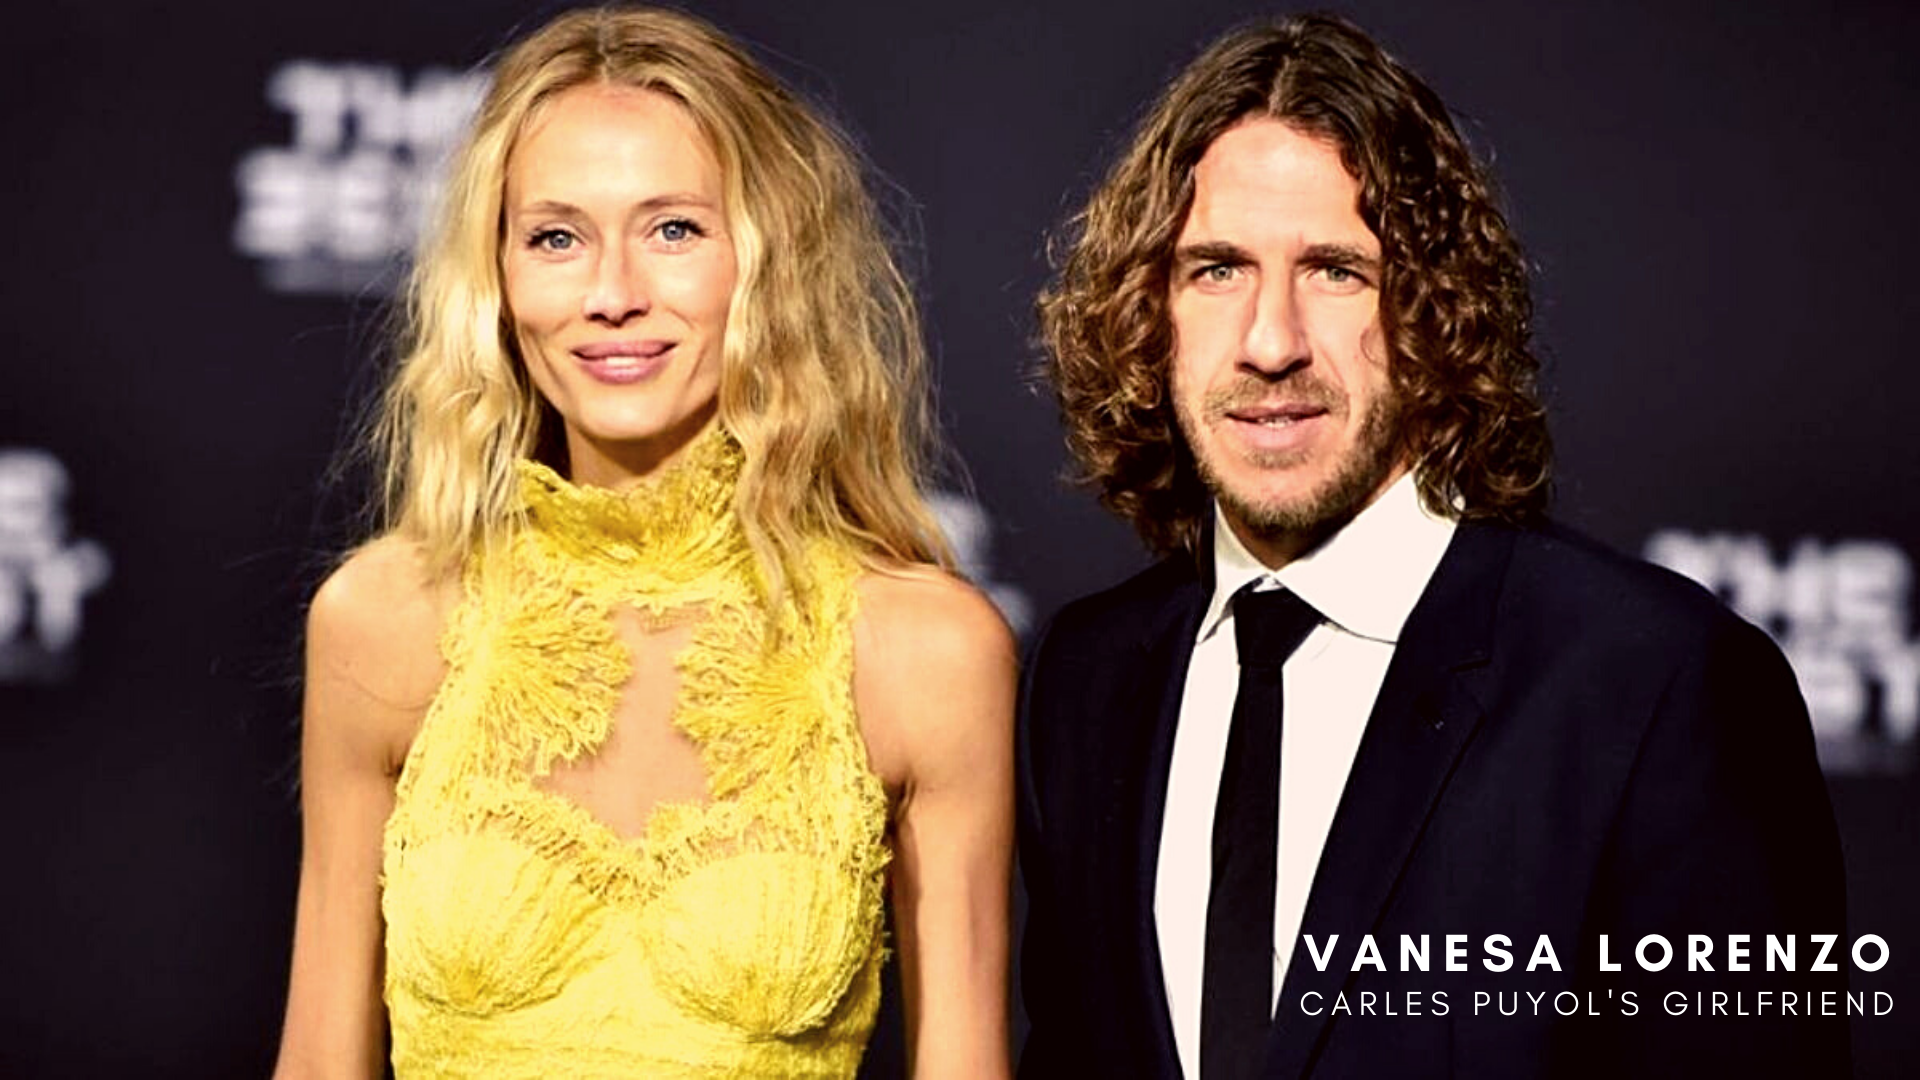 Carles Puyol with girlfriend Vanesa Lorenzo. (Picture was taken from SportMob)